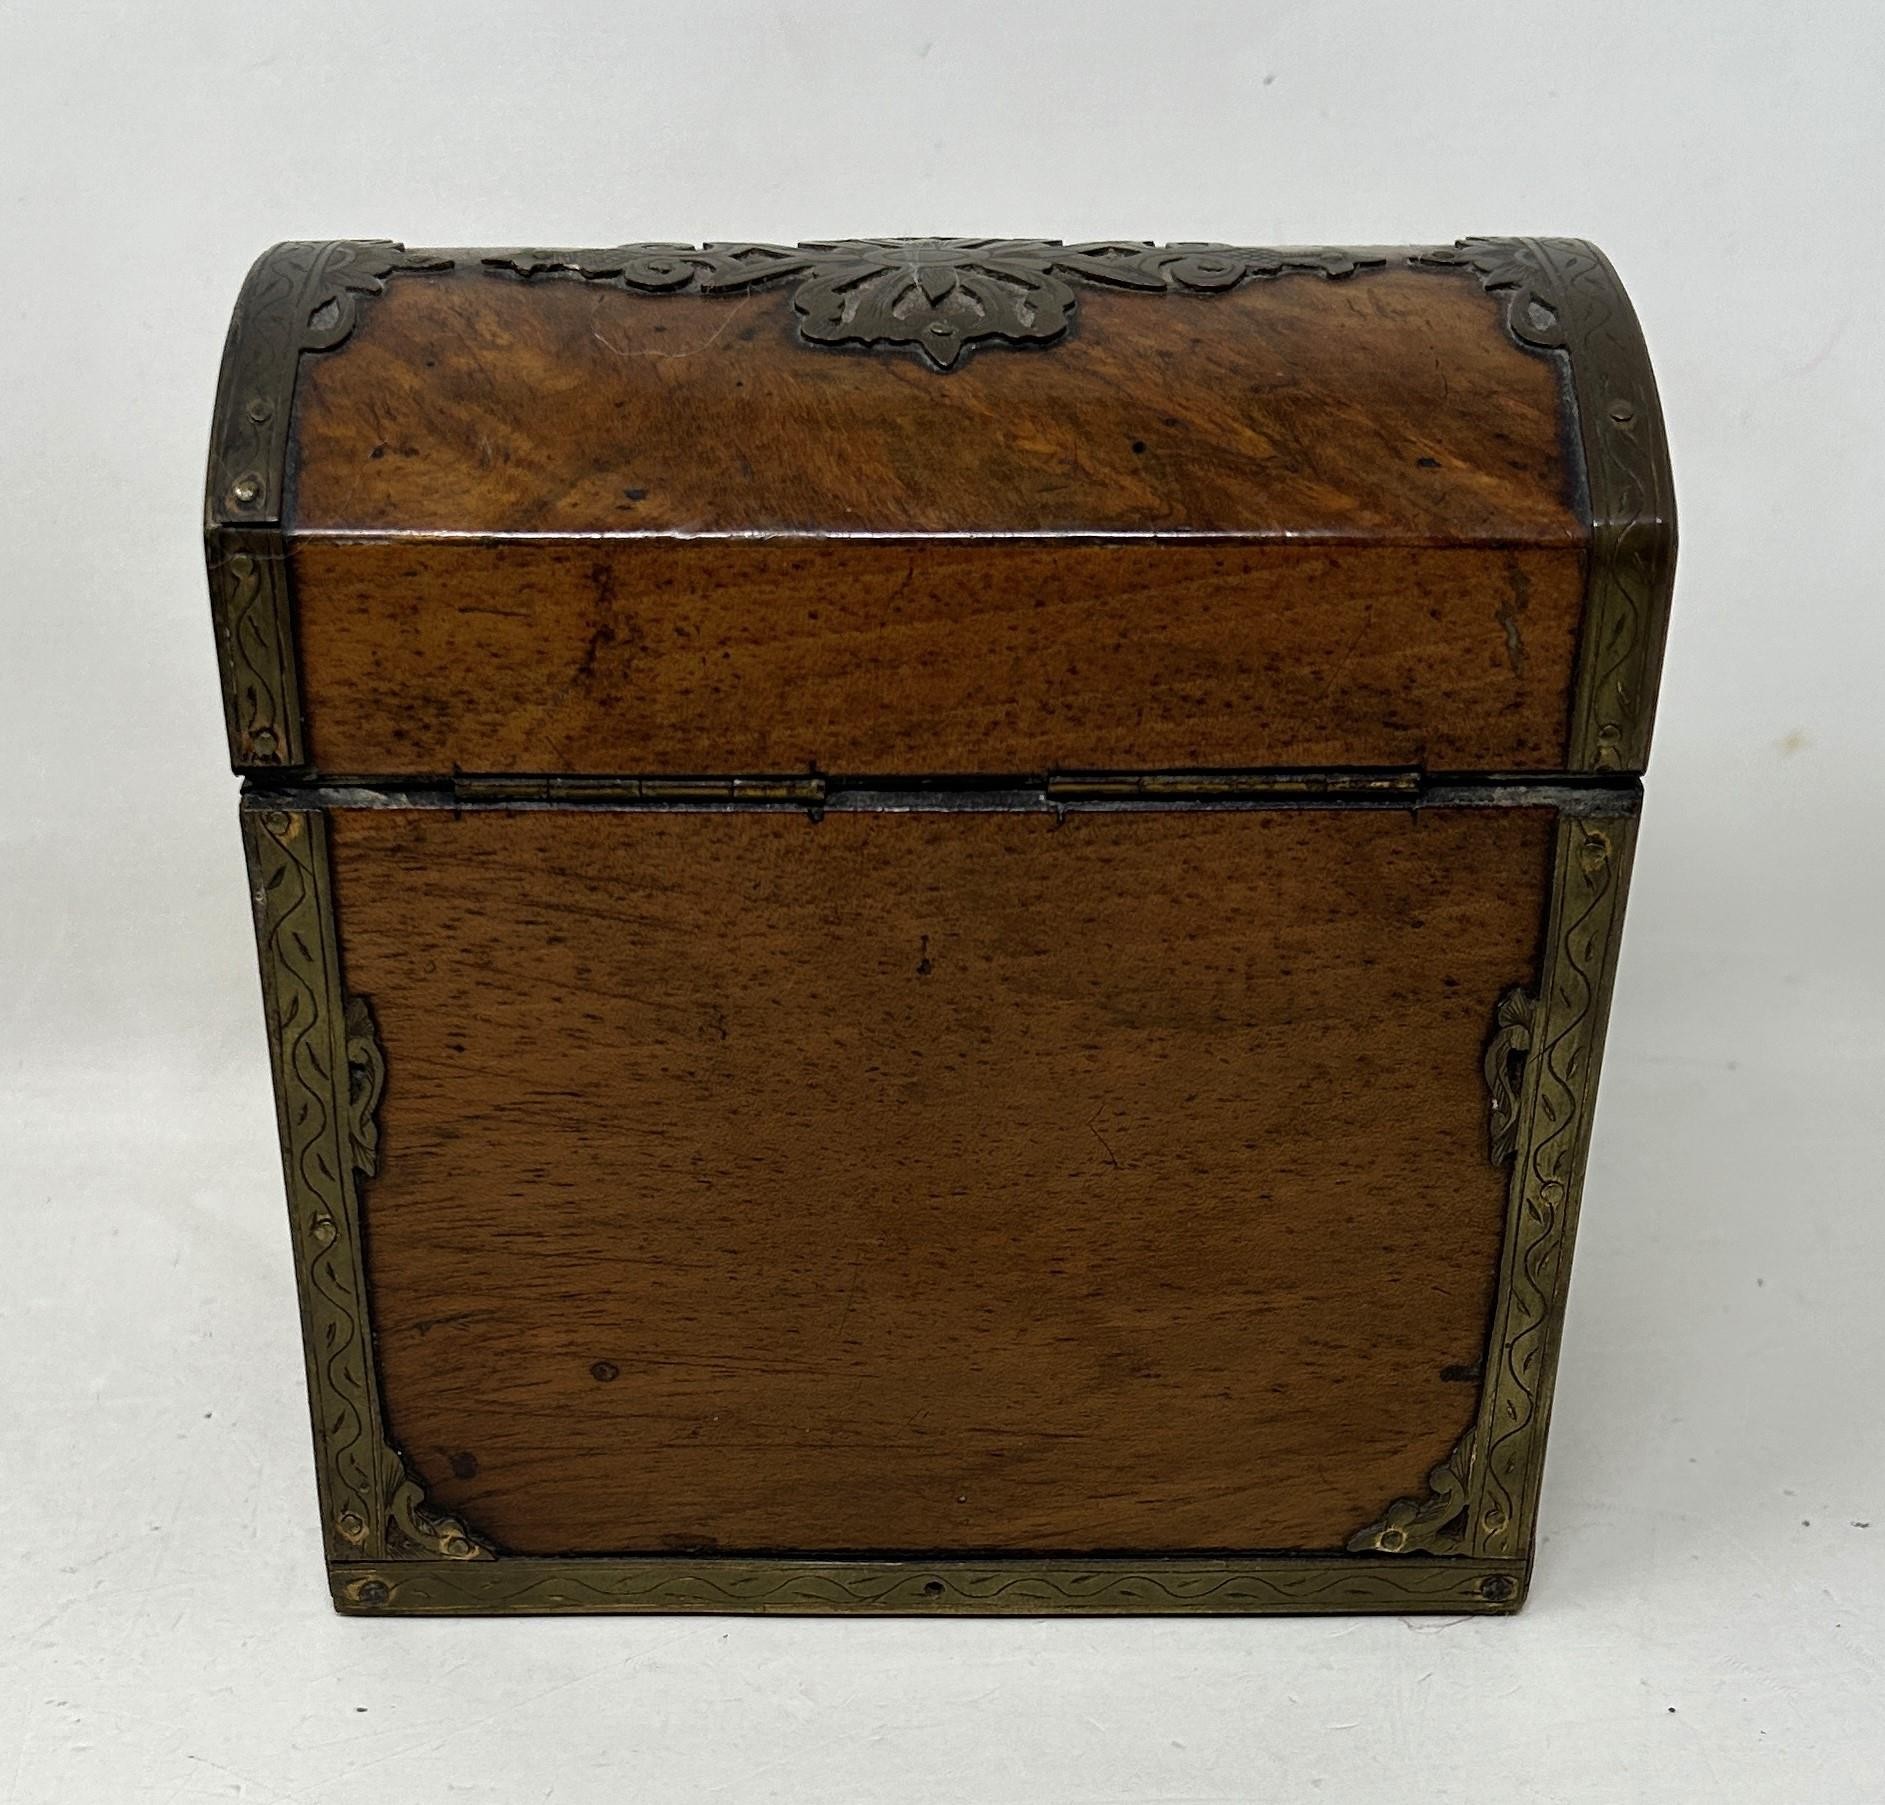 A walnut and brass bound decanter box, 14 cm wide some damage to the glass - Image 4 of 4